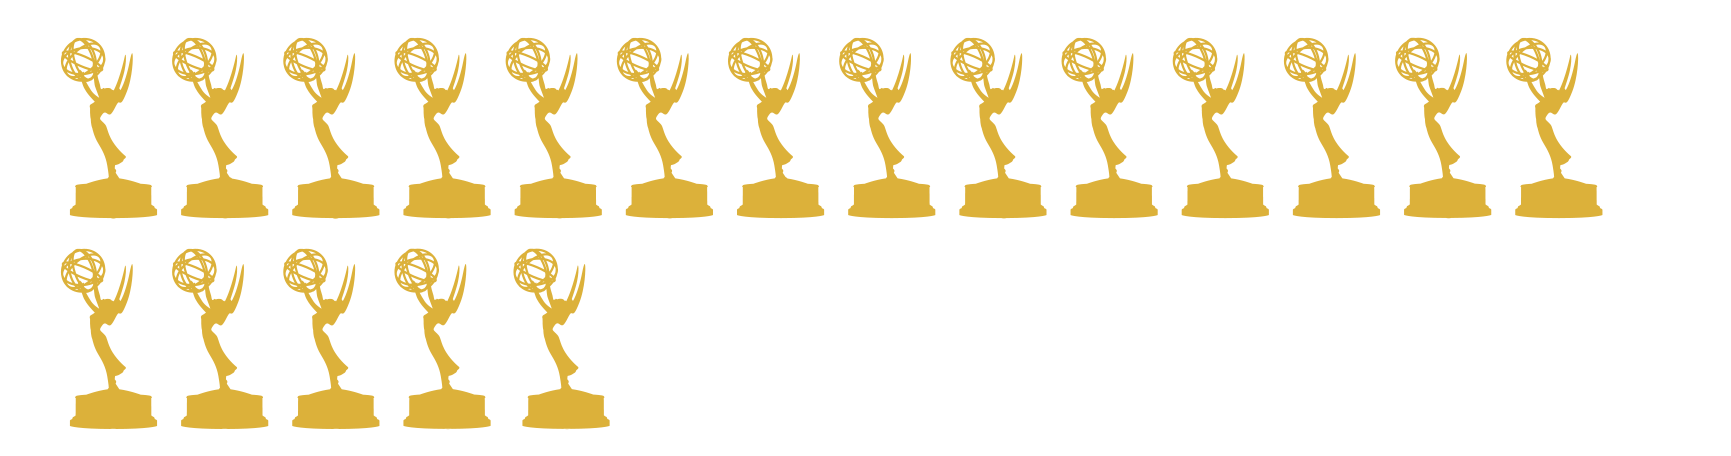 Emmy Awards PNG High Quality Image